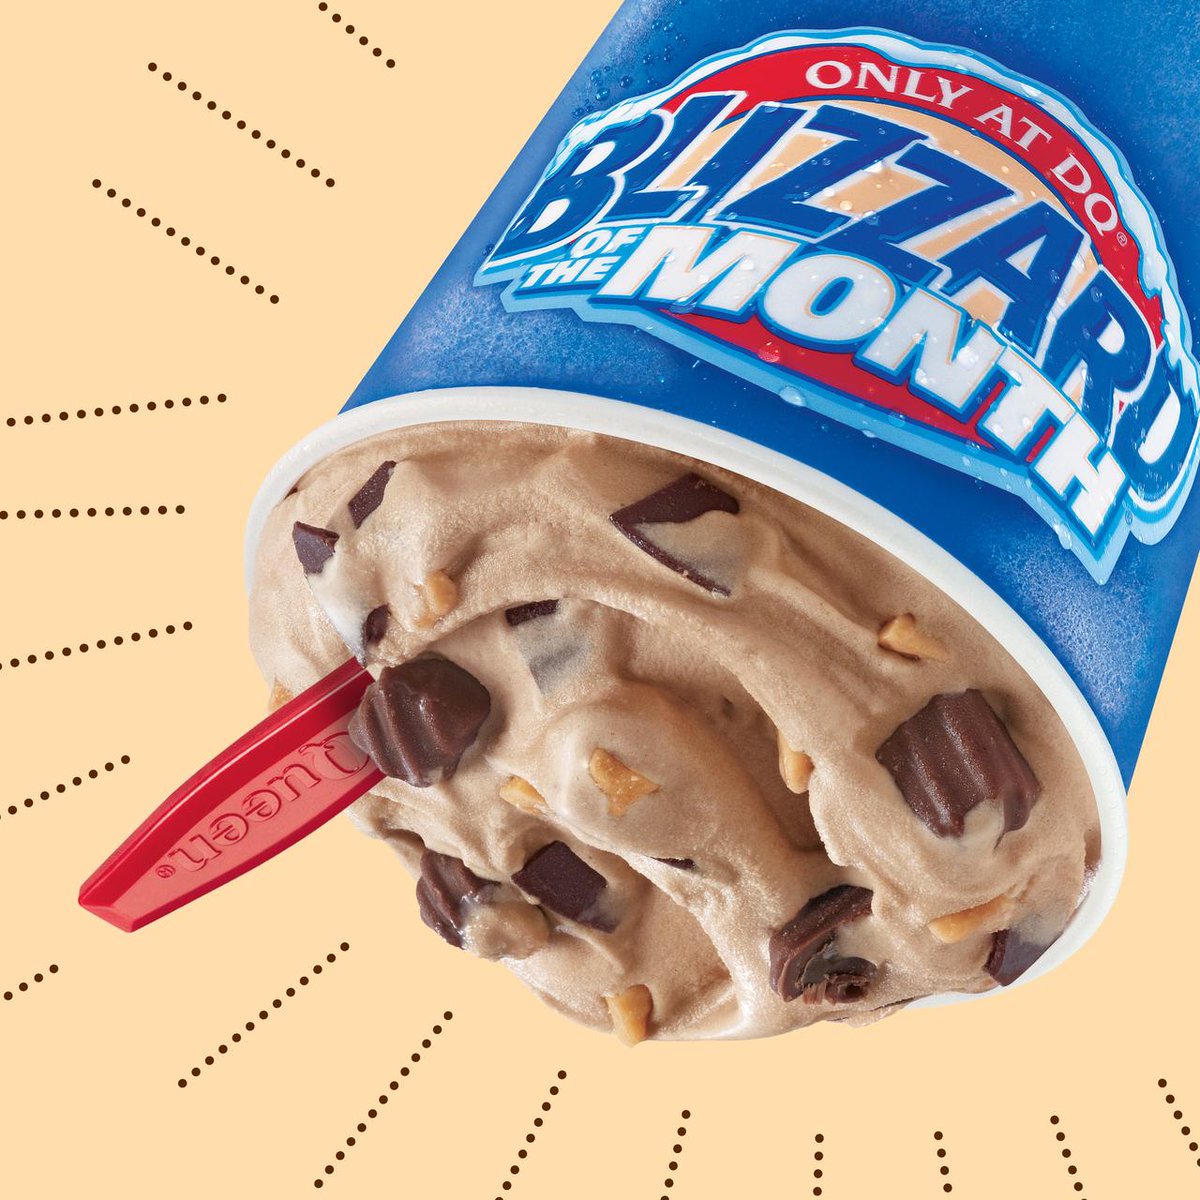 Dairy Queen's new Blizzard Flavour is creating quite a storm!